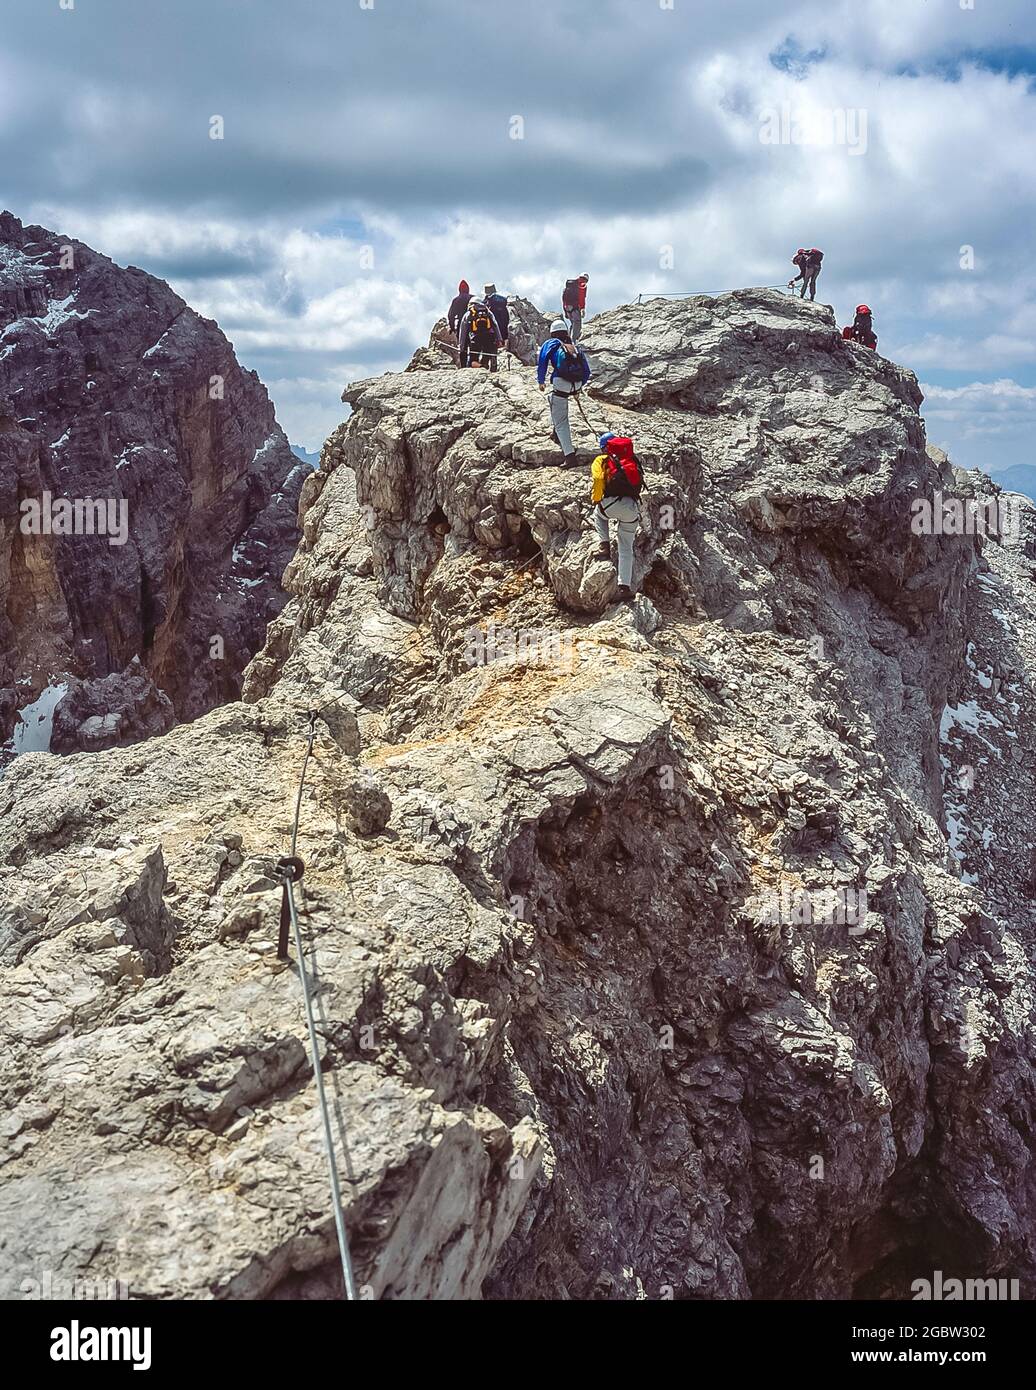 This is the Via Ferrata protected climbing path on Monte Cristallo near Cortina  d'Ampezzo in the Italian Dolomites of the Alto Adige. The mountain was part  of the Italian Front Line defence